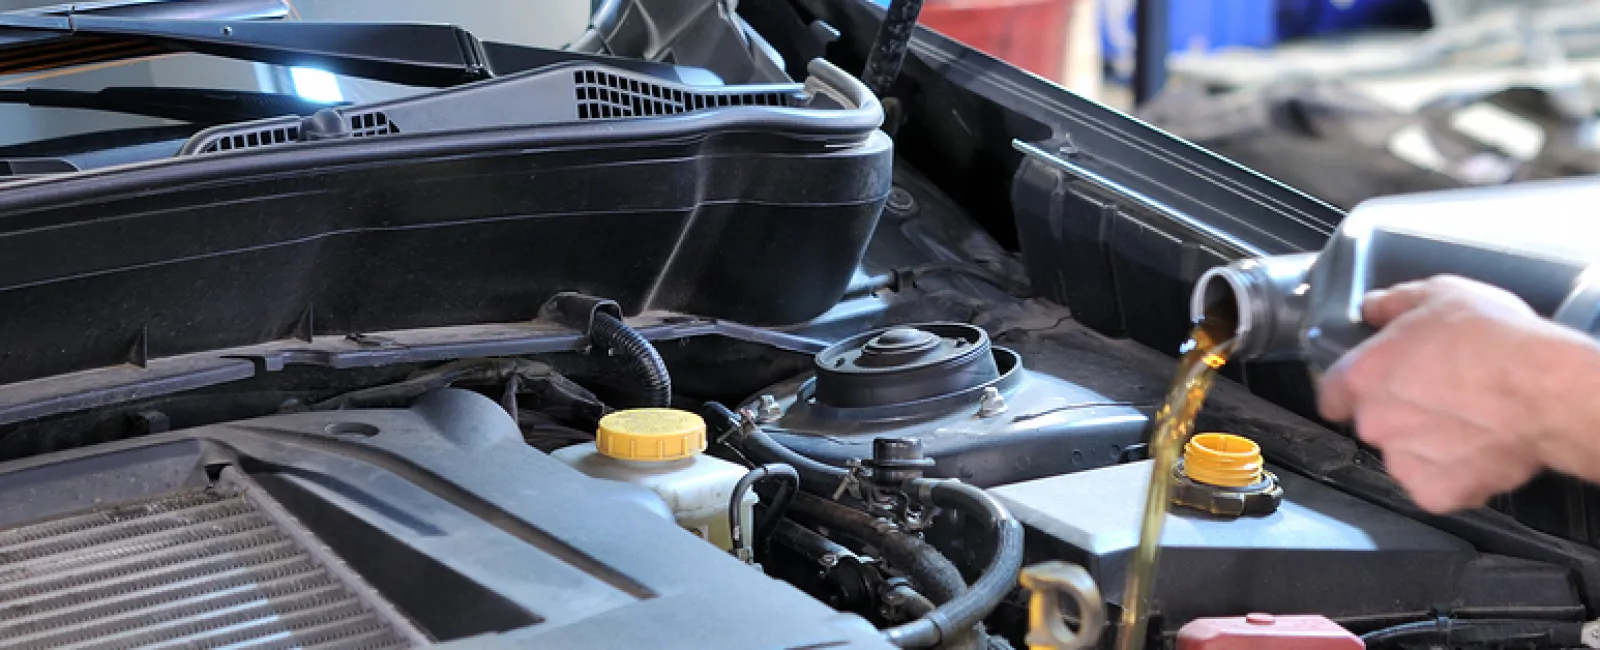 Pennzoil Oil: When Changing Your Oil, Not Just Any Oil Will Do